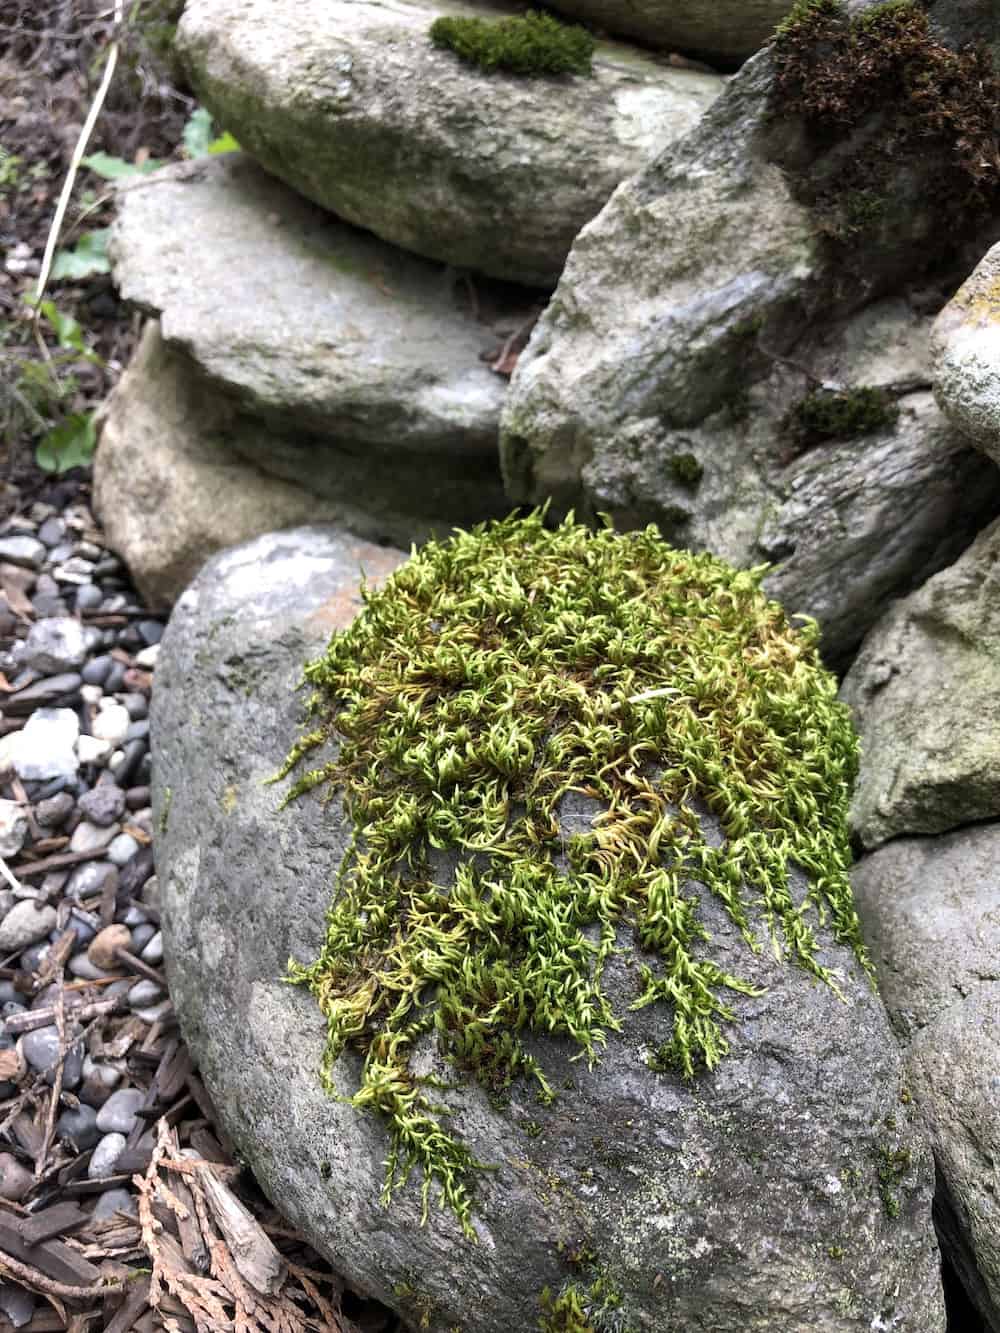 Moss on a stone